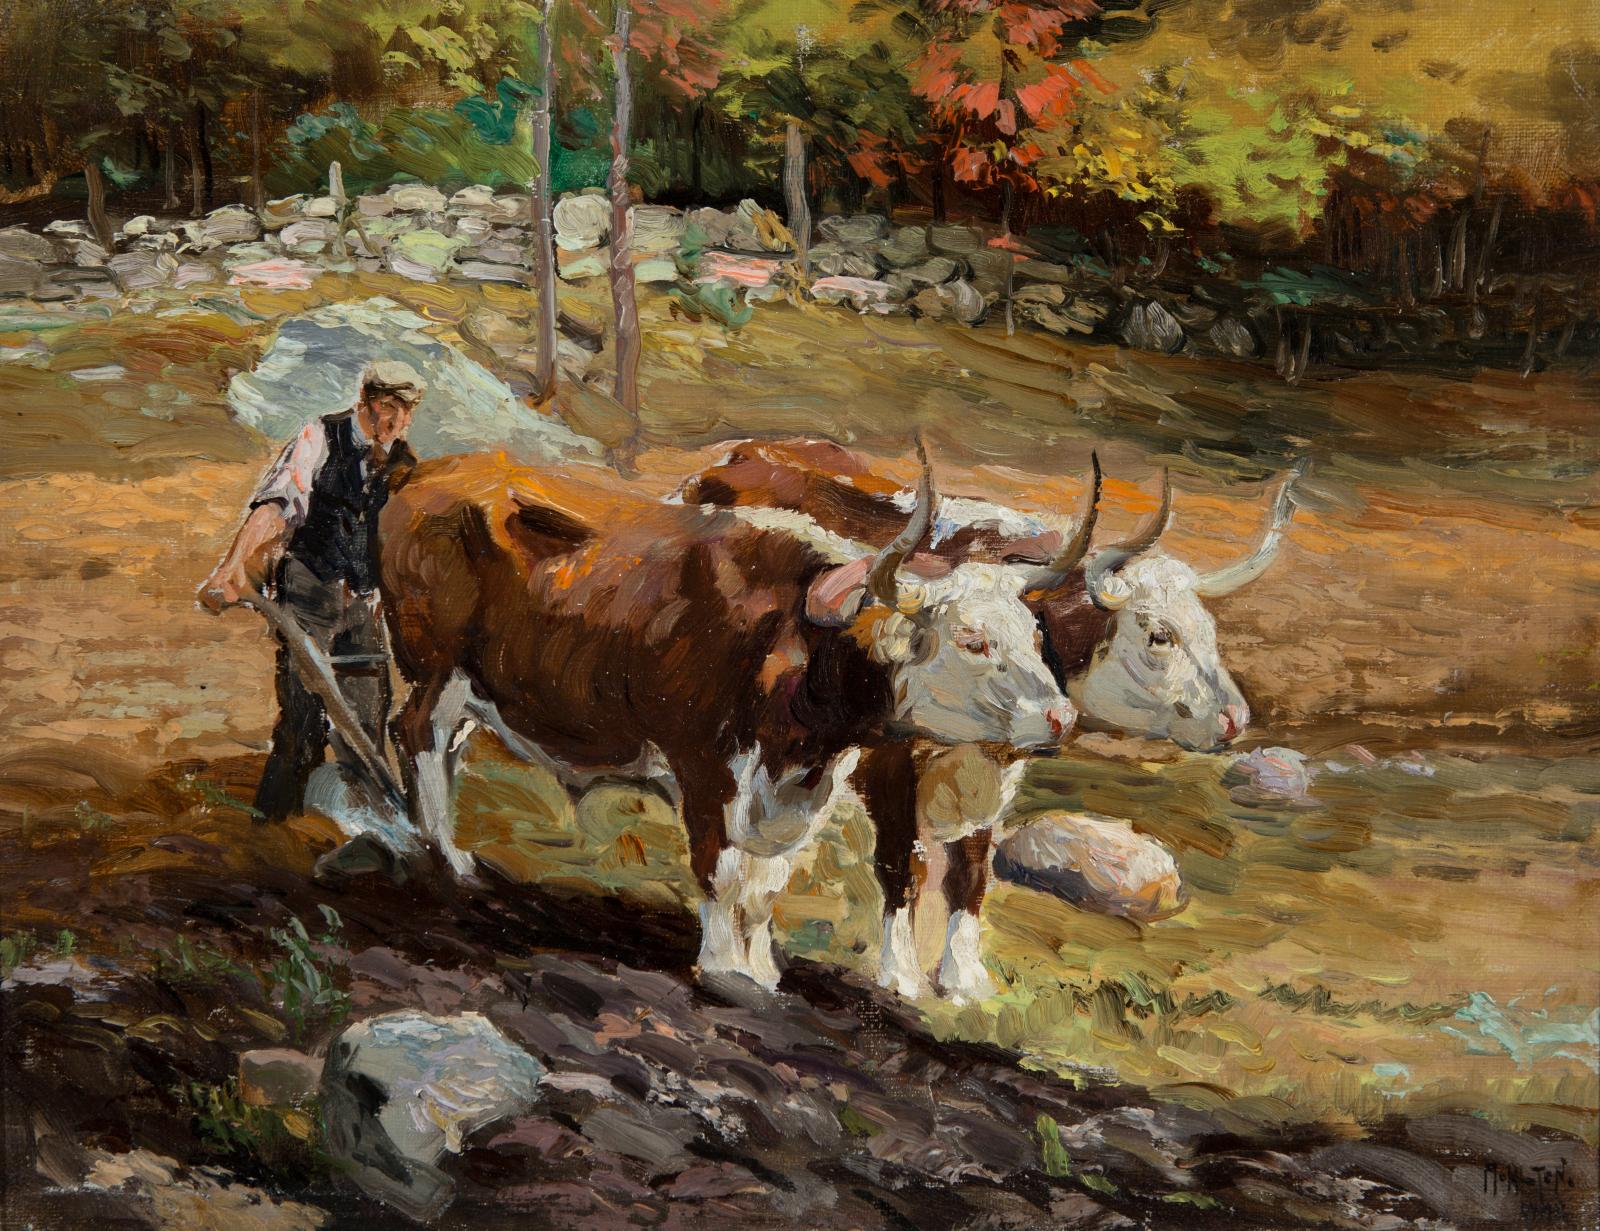 Man holding a plow behind two oxen.